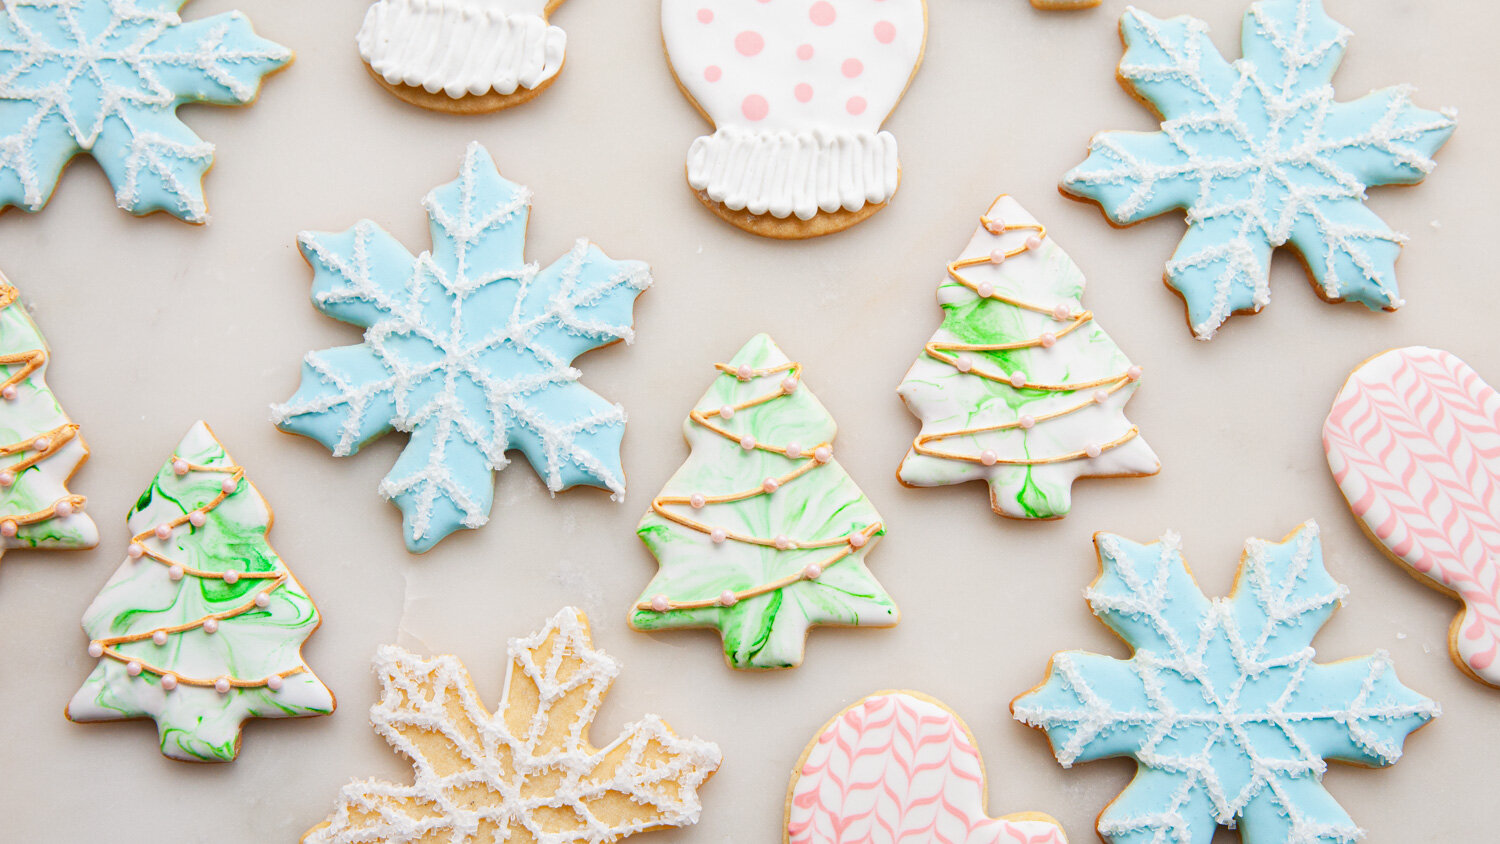 How to decorate Christmas cookies with royal icing.